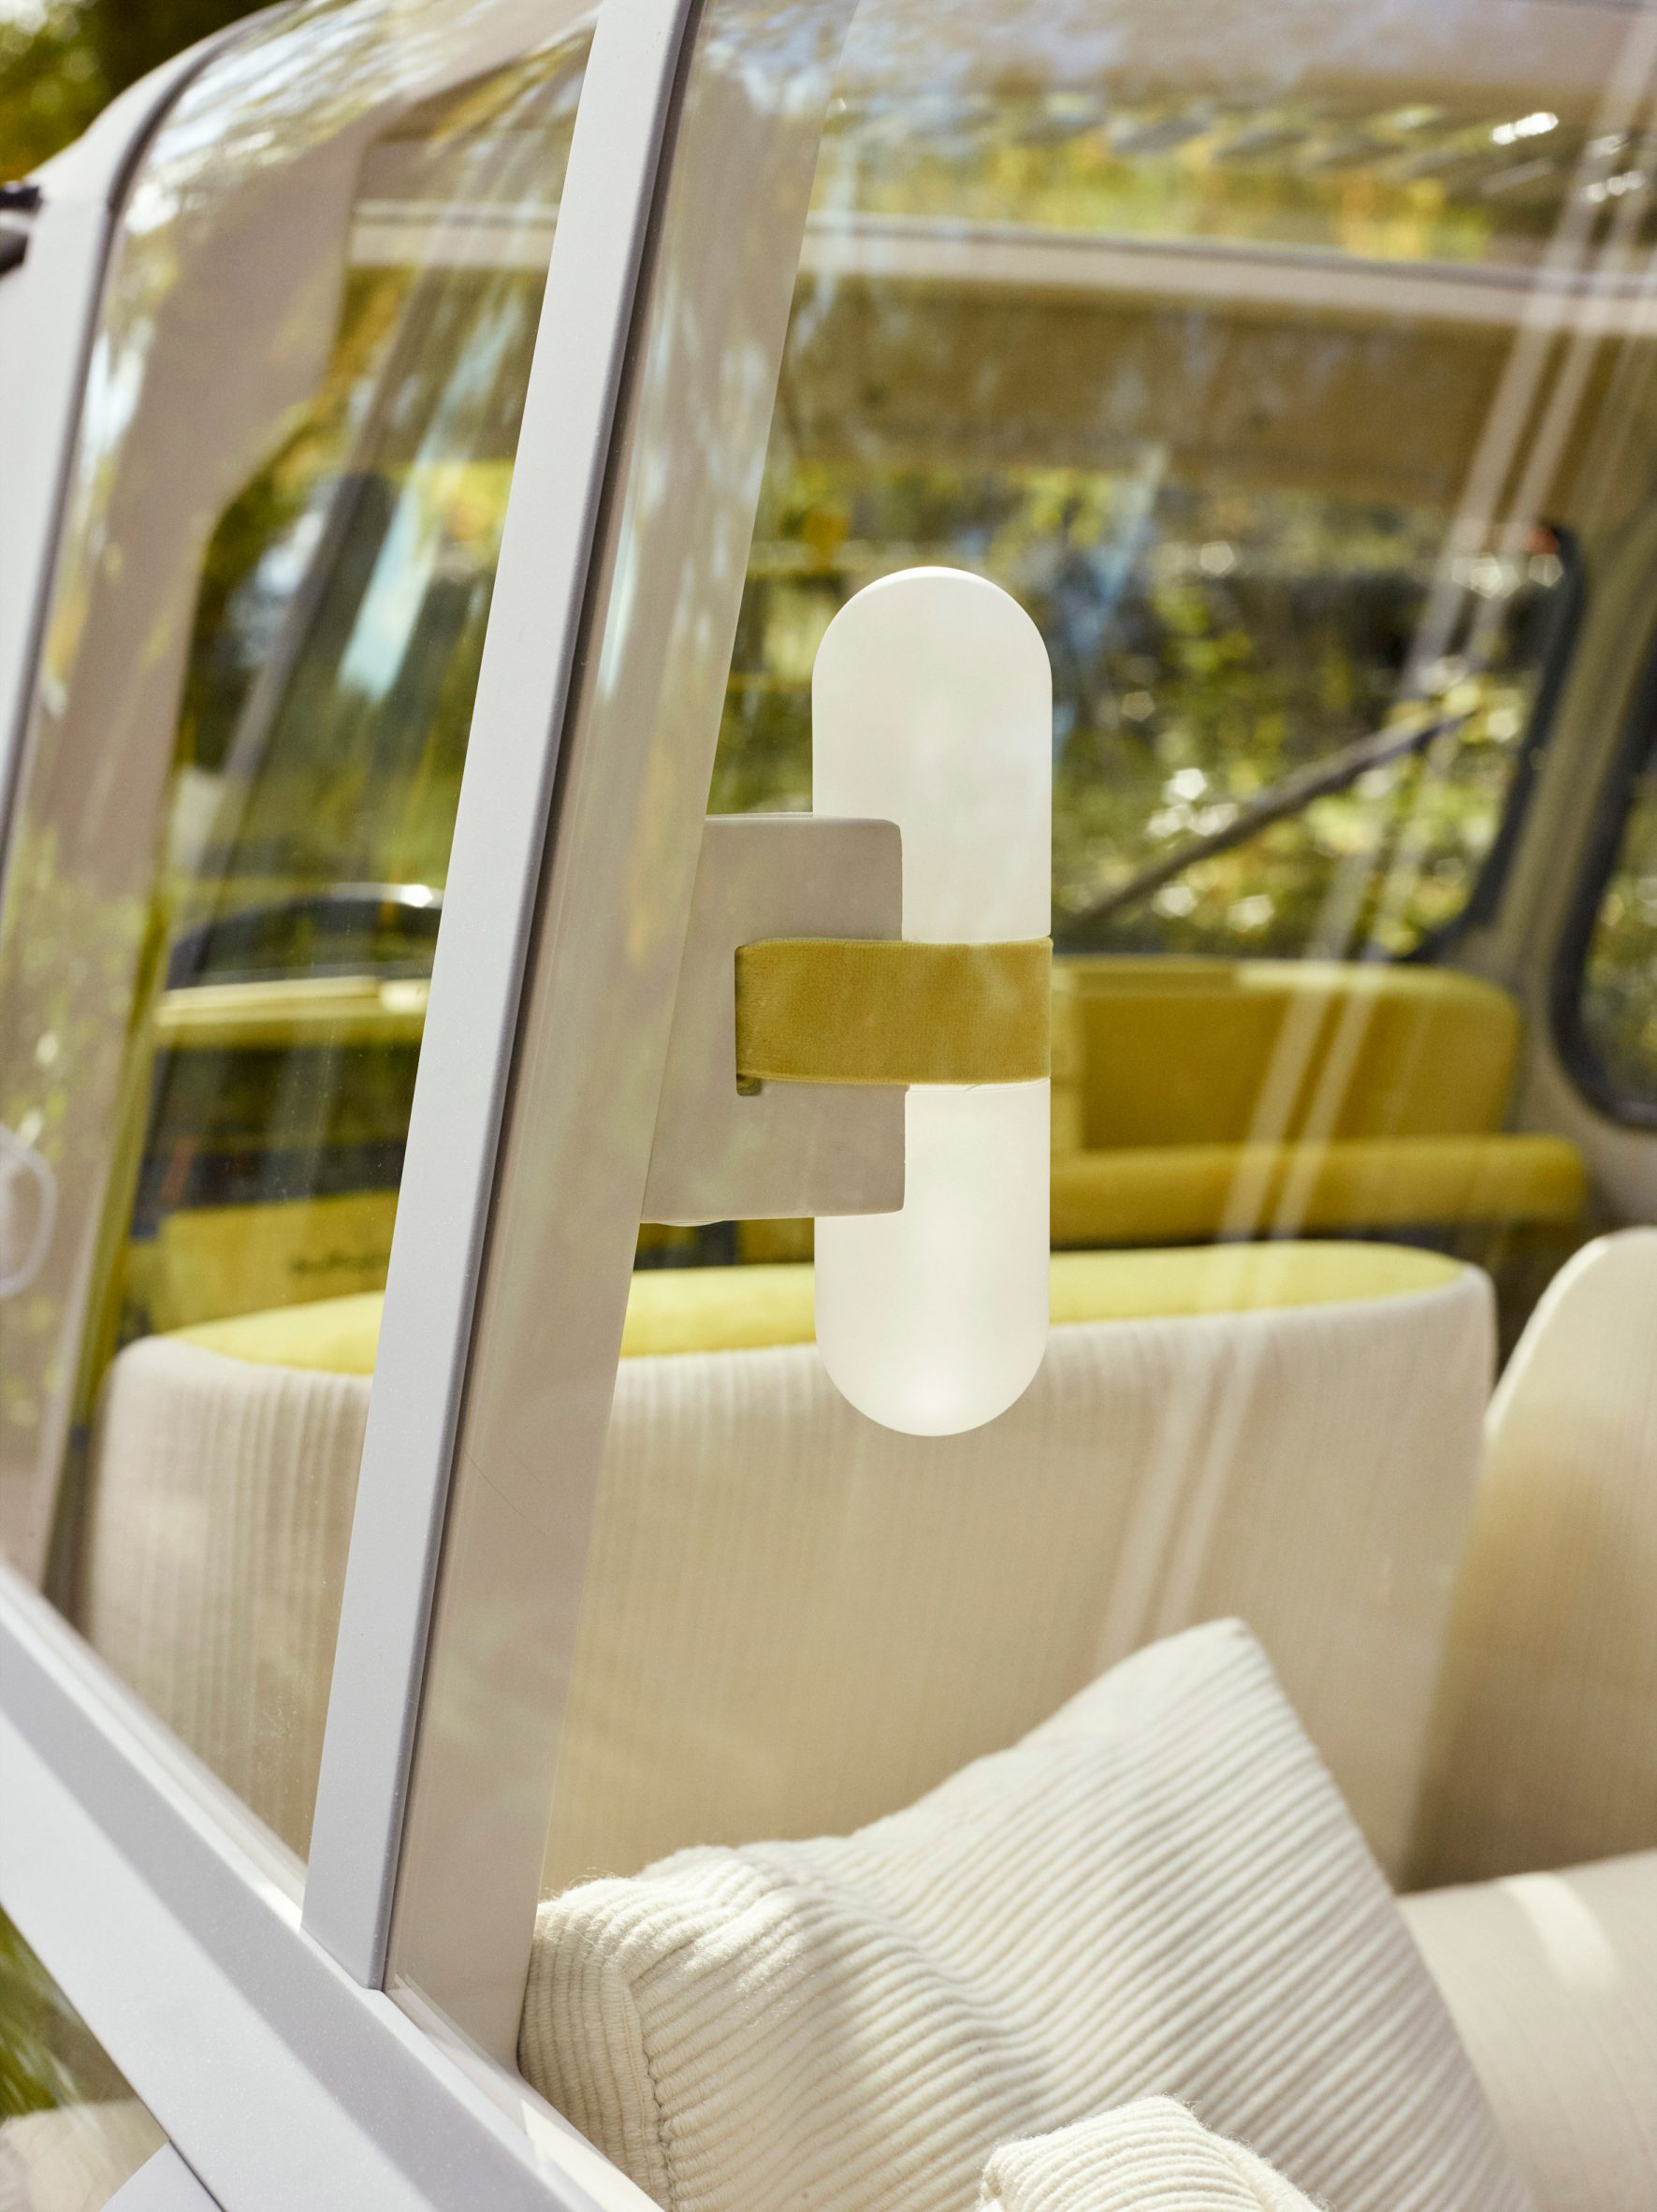  View through the rear windows of the principle automobile revealing cream-coloured cushions and a capsule-shaped wall light